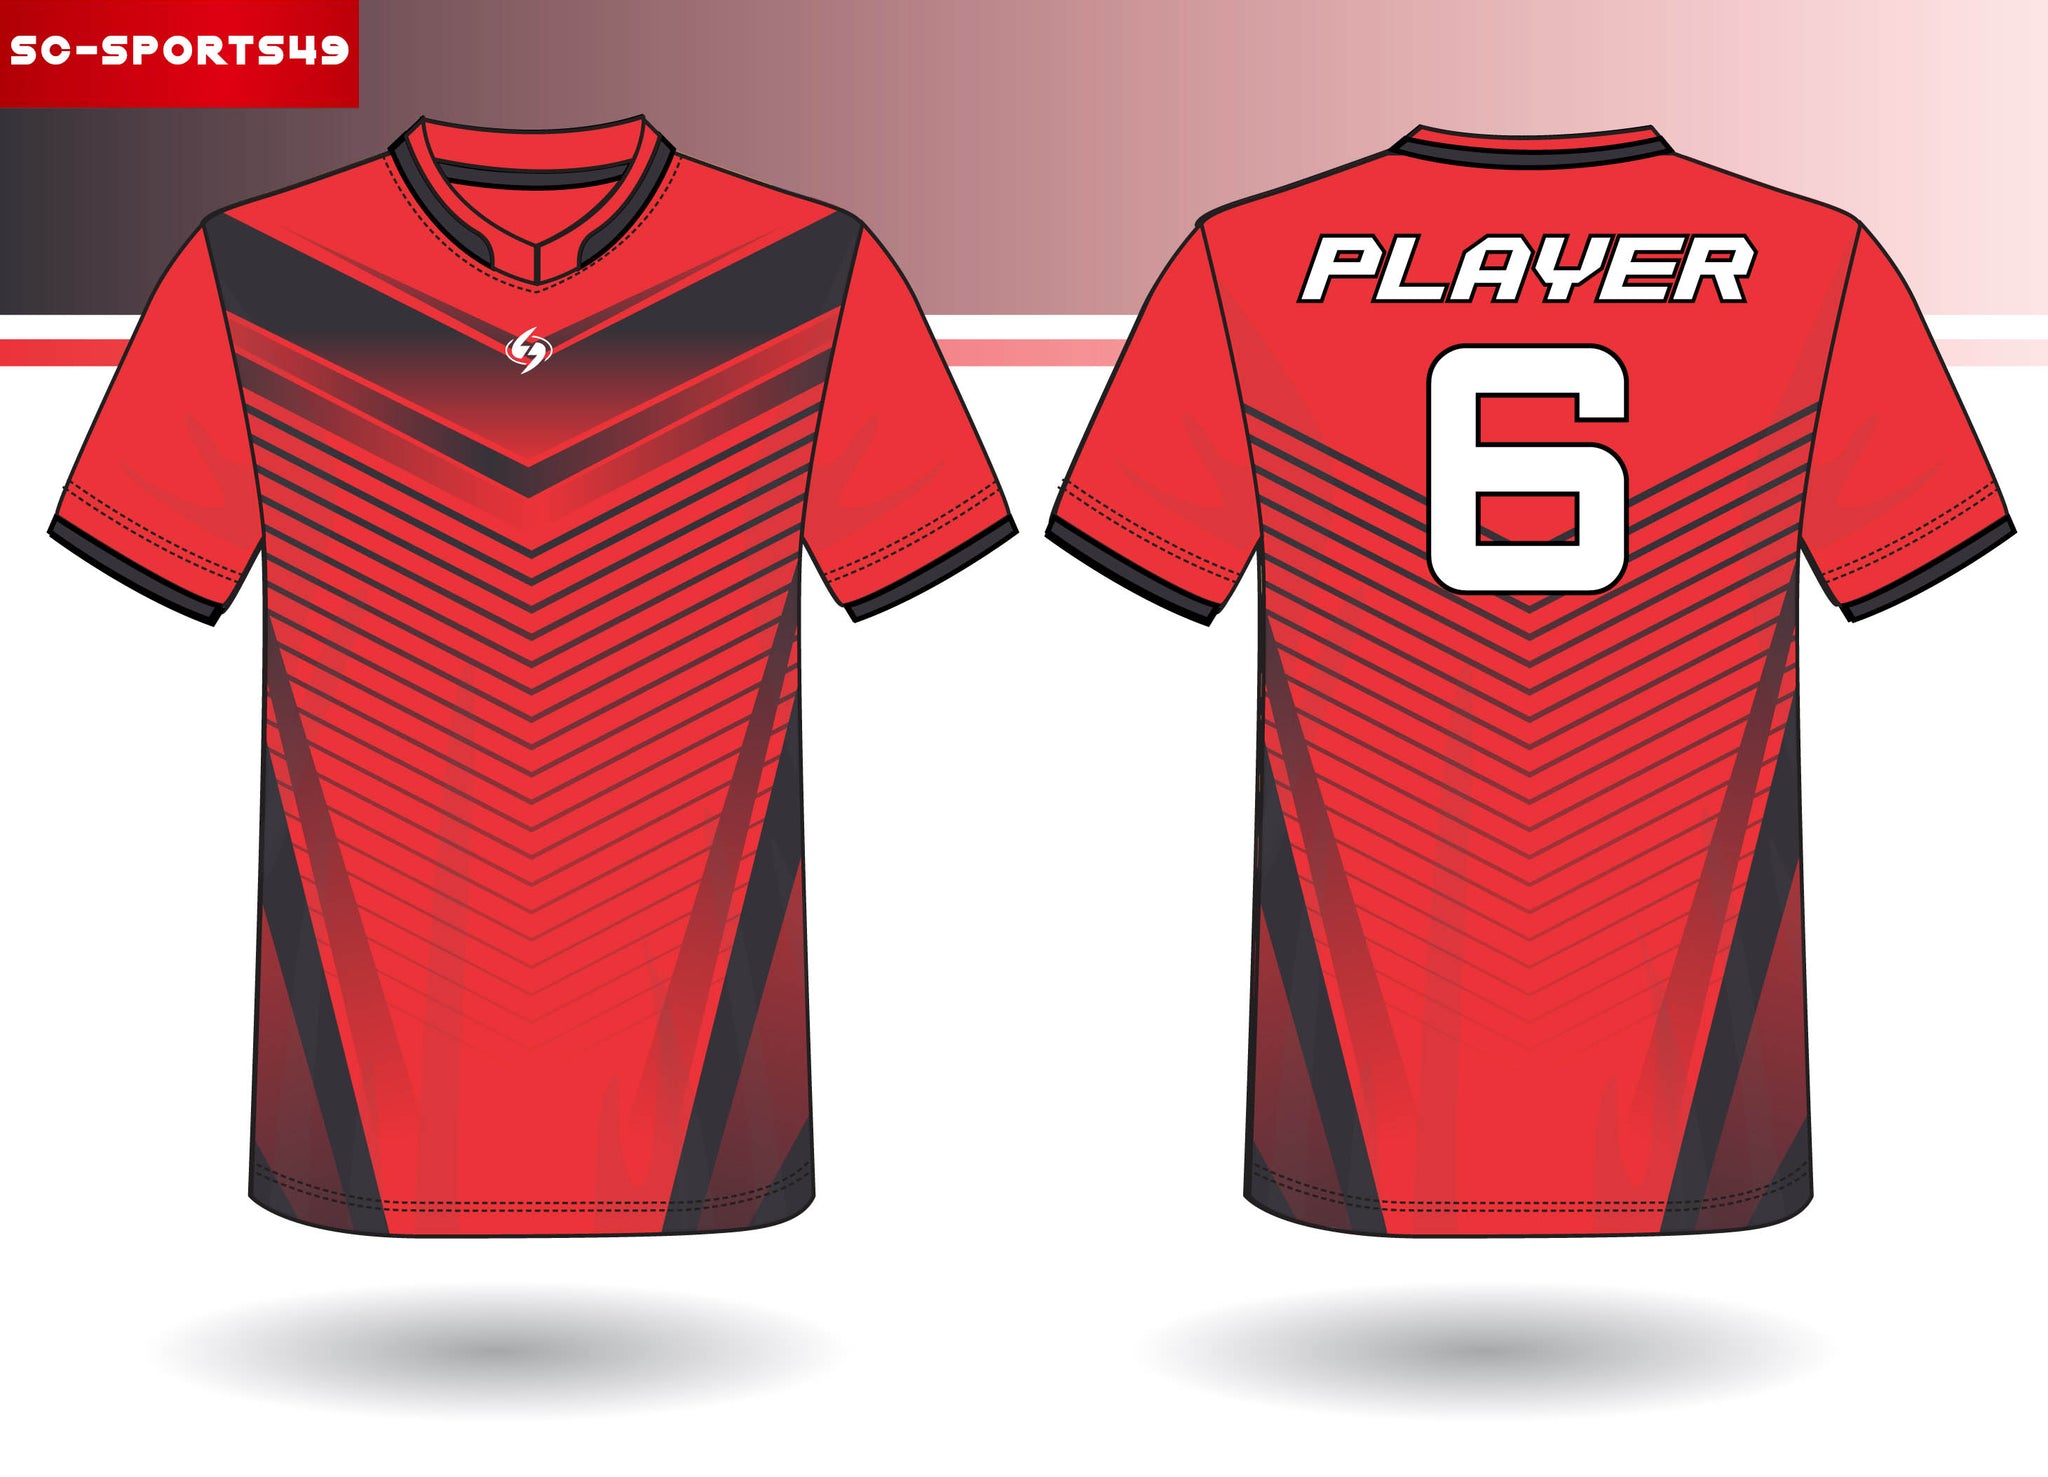 red colour football jersey